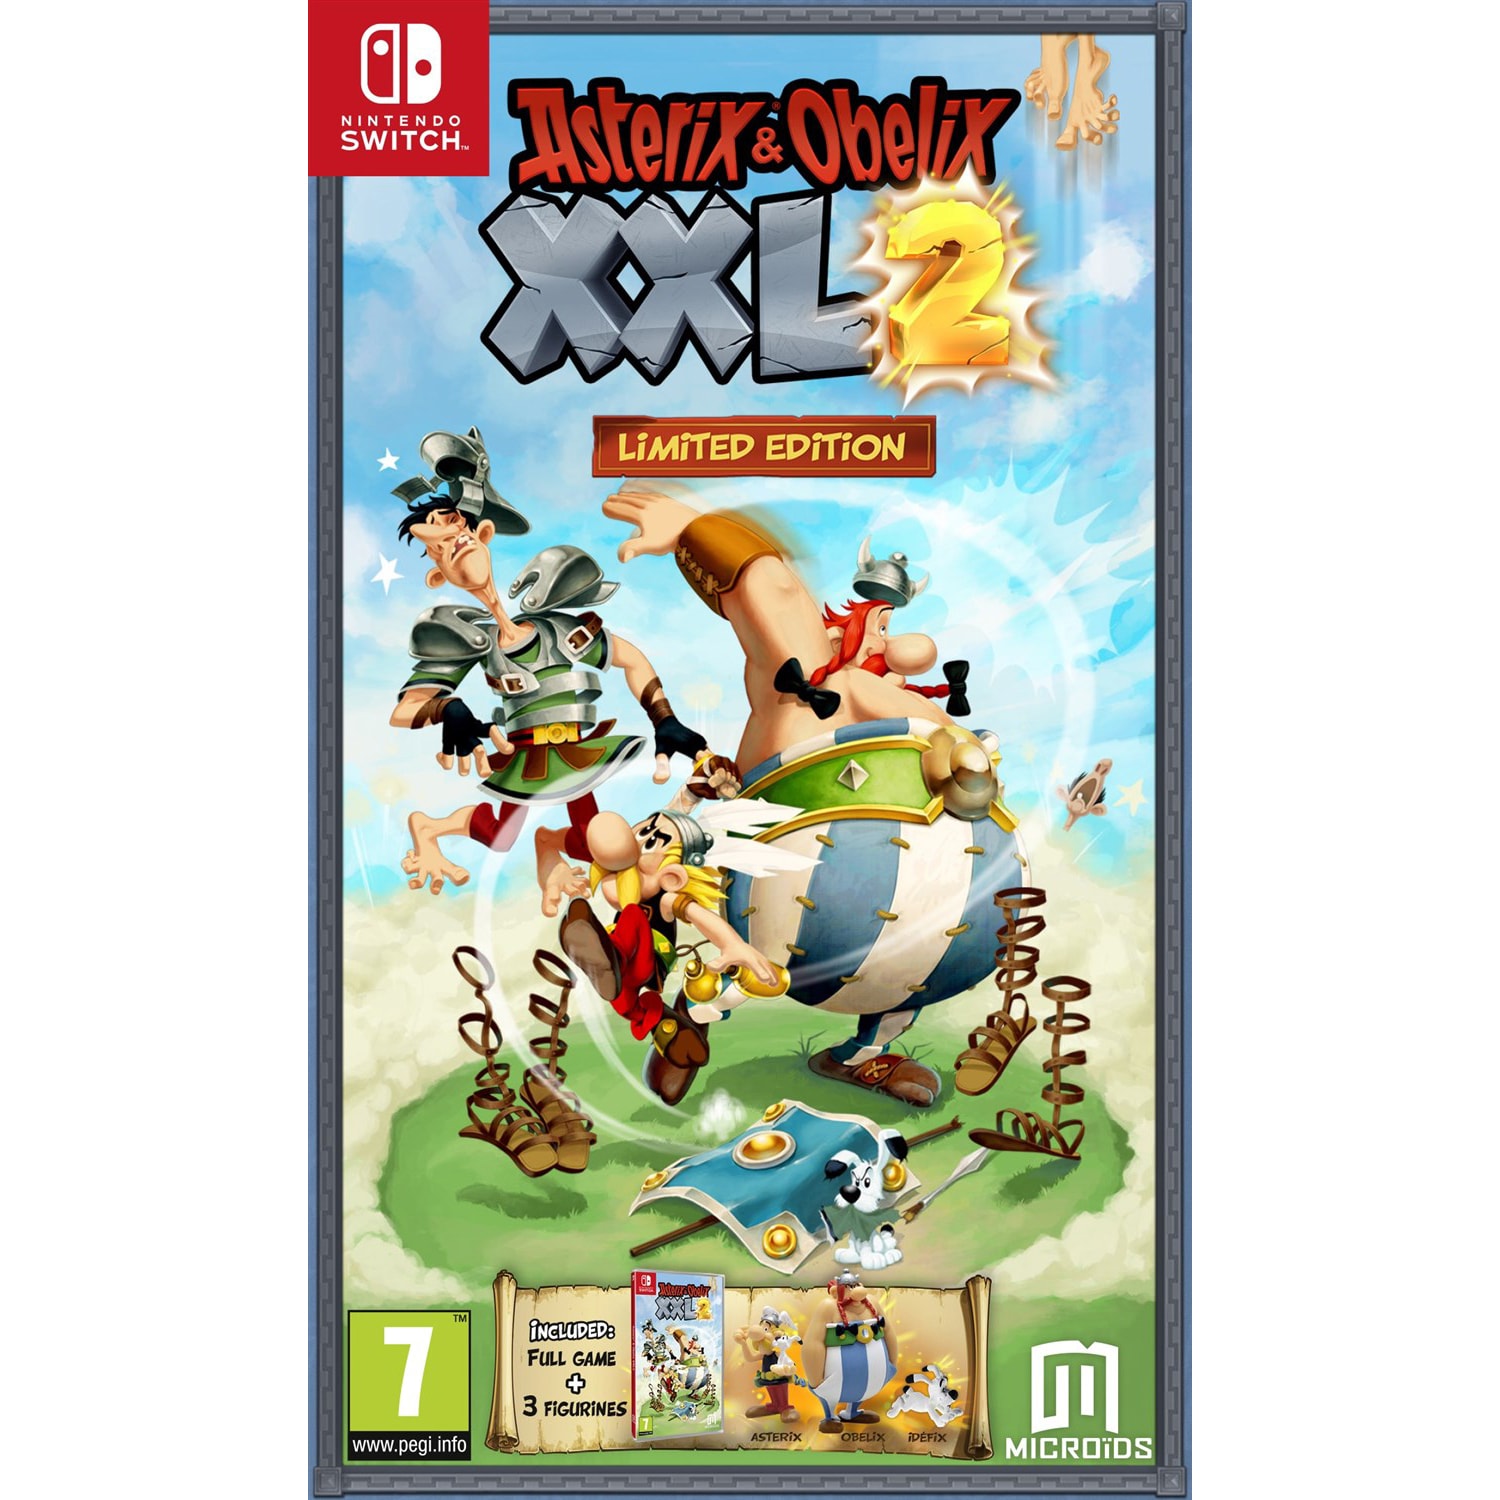 Asterix and Obelix XXL2: Limited Edition - Switch | Elgiganten